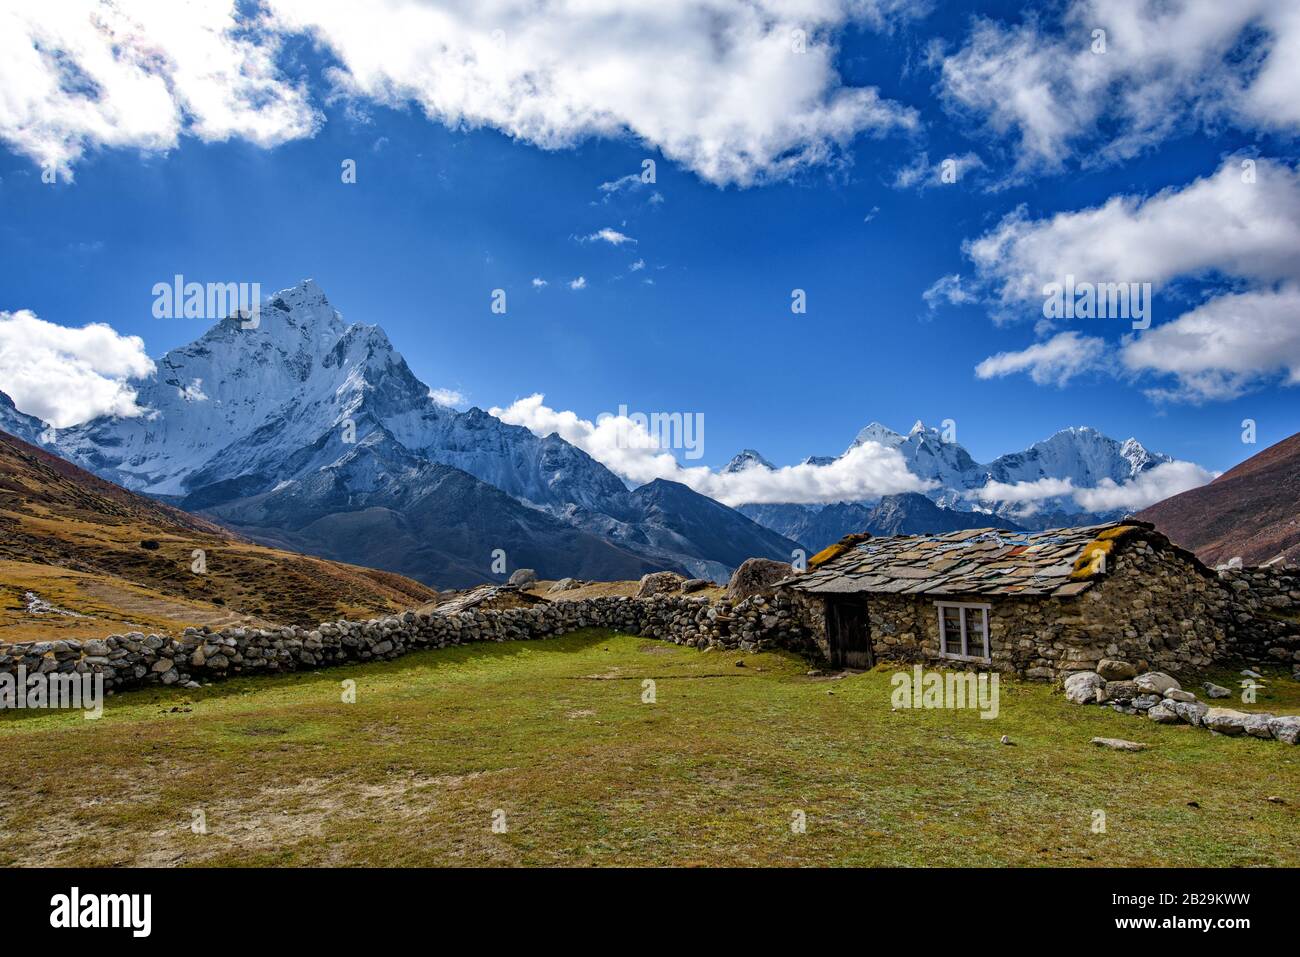 The view of the mountain area of Everest Base Camp trekking route at Himalayas mountain range in Nepal Stock Photo